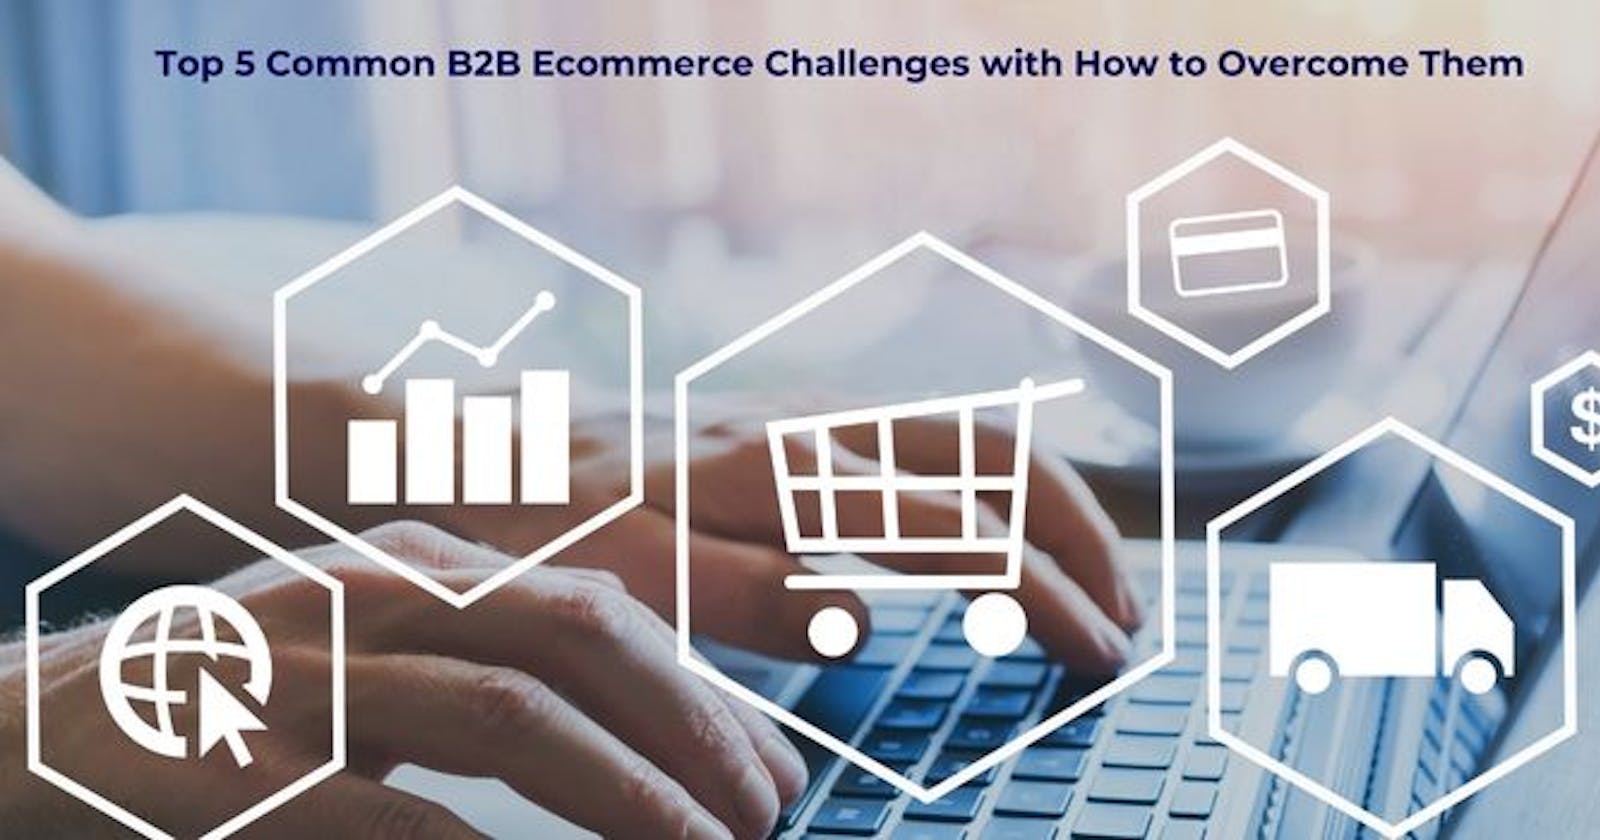 Top 5 Common B2B Ecommerce Challenges with How to Overcome Them